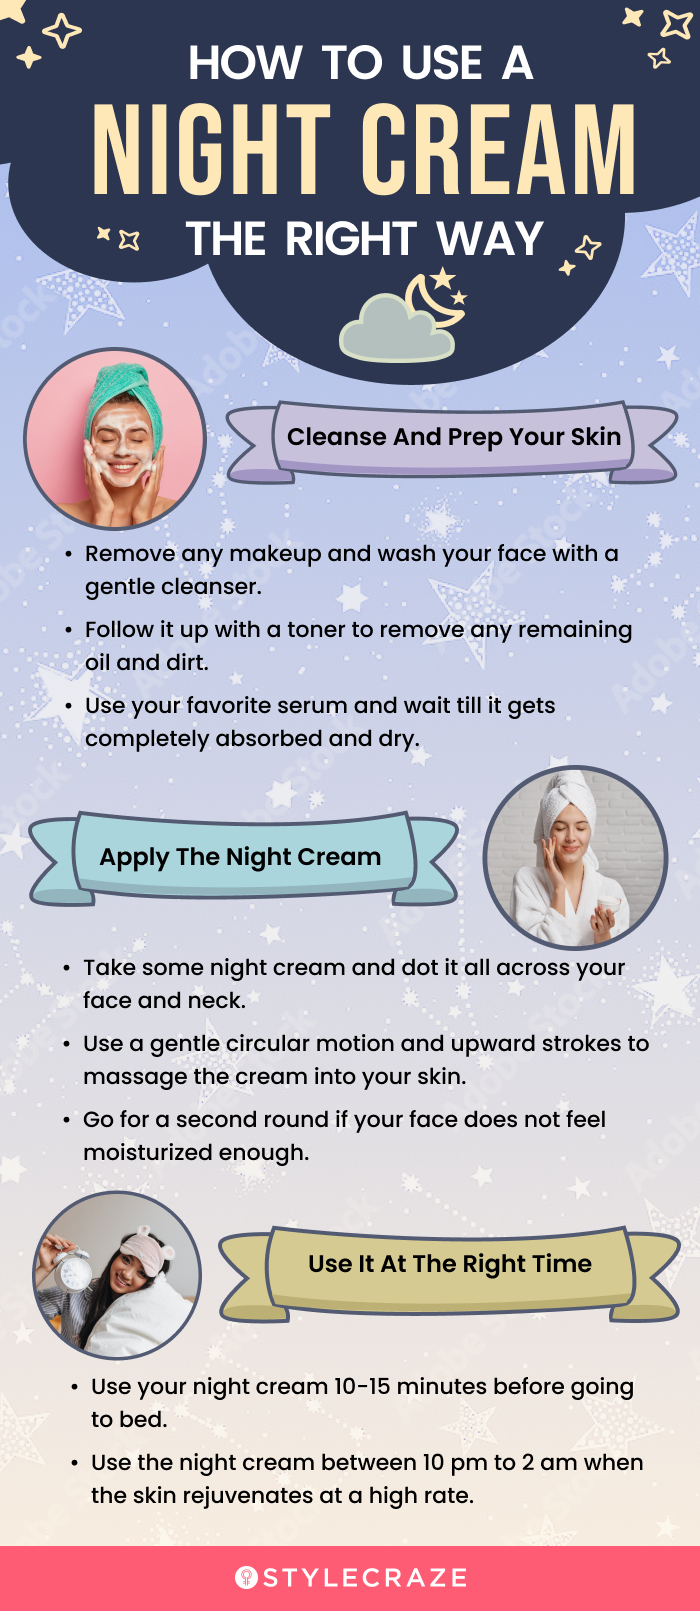 How To Use a Night Cream The Right Way (infographic)